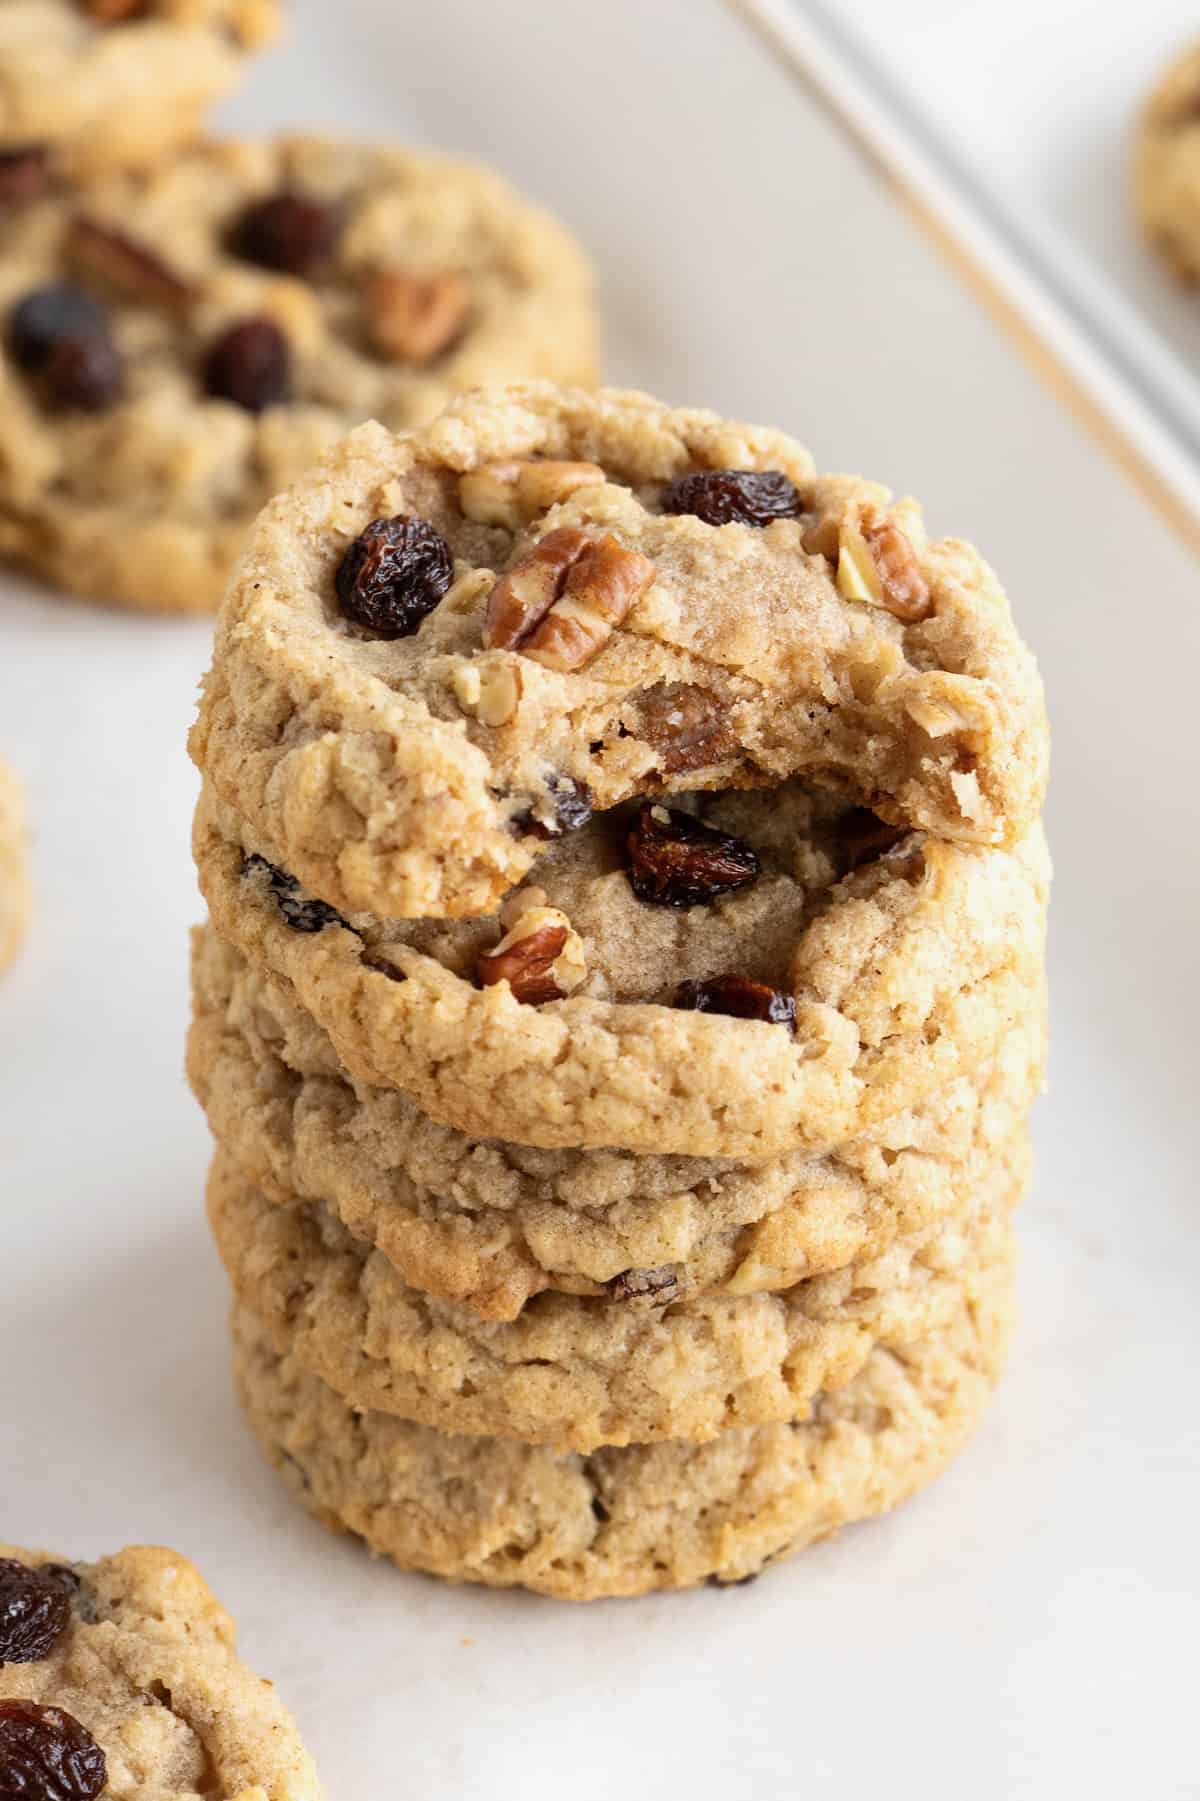 A stack of five oatmeal raisin cookies with pecans. The top cookie has a bite out of it.